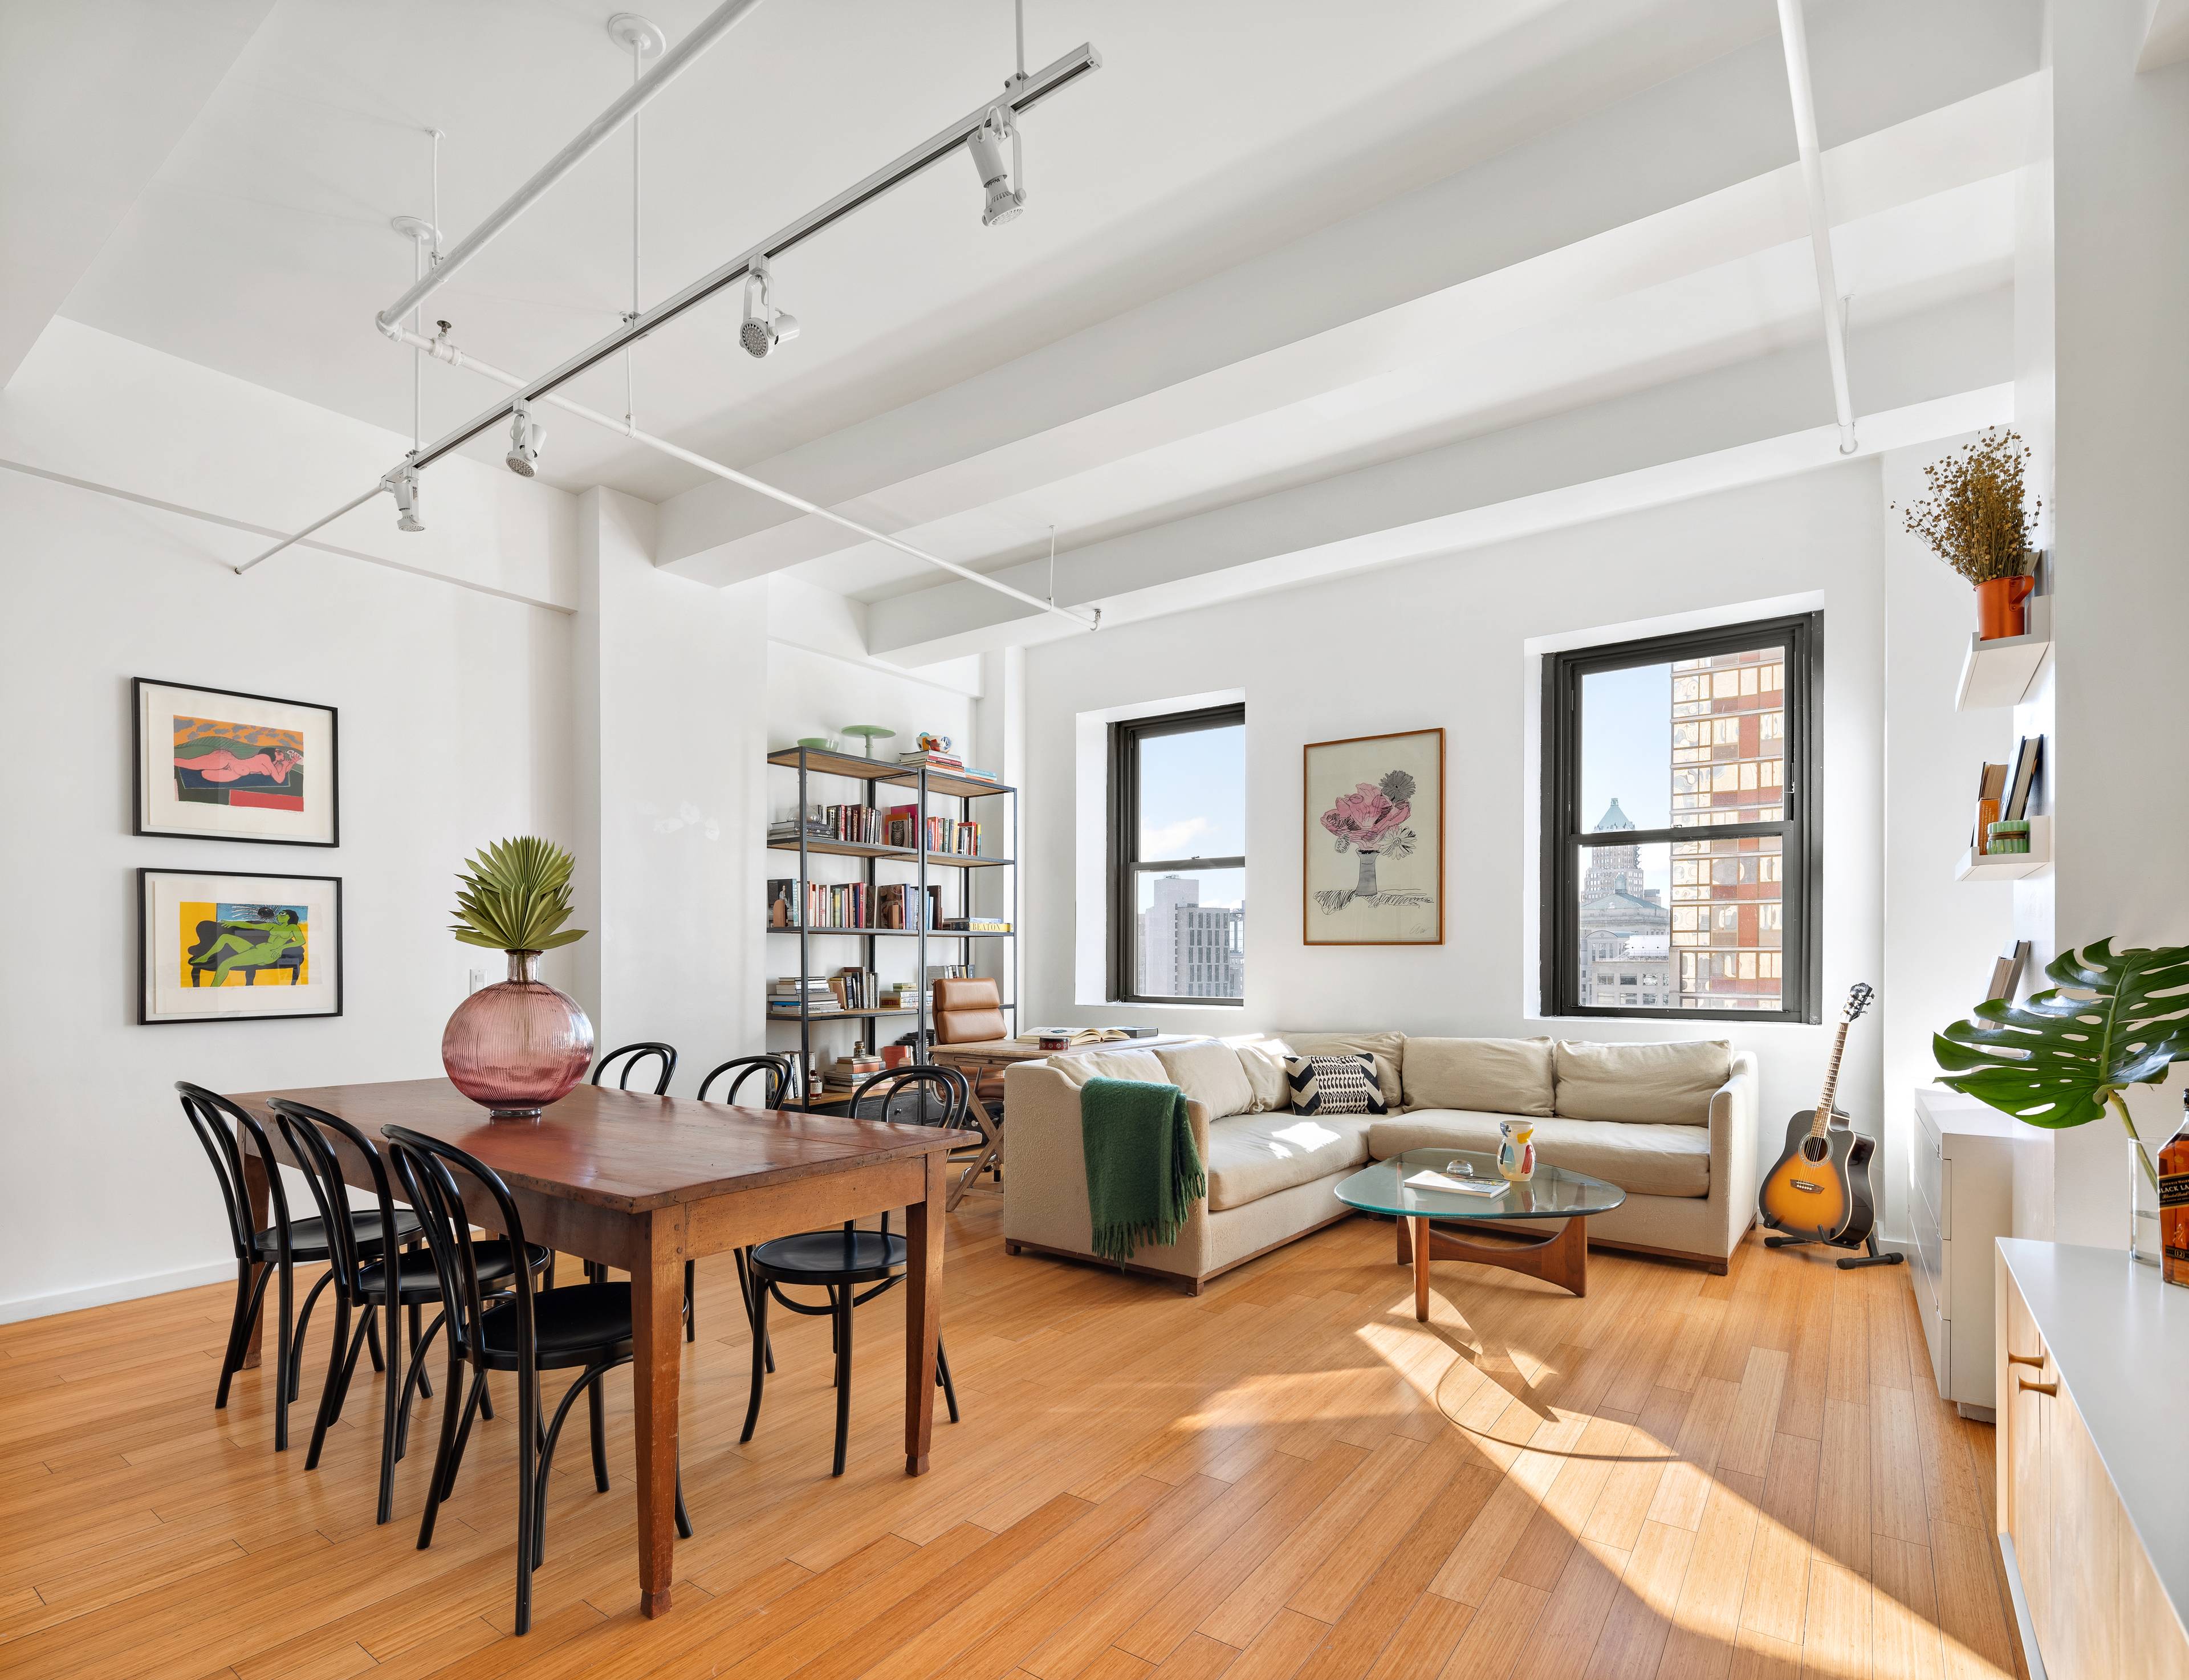 Arguably one of the best layouts in the building, this high 14th floor loft with open city and sky views draws you into a bright entertaining space.